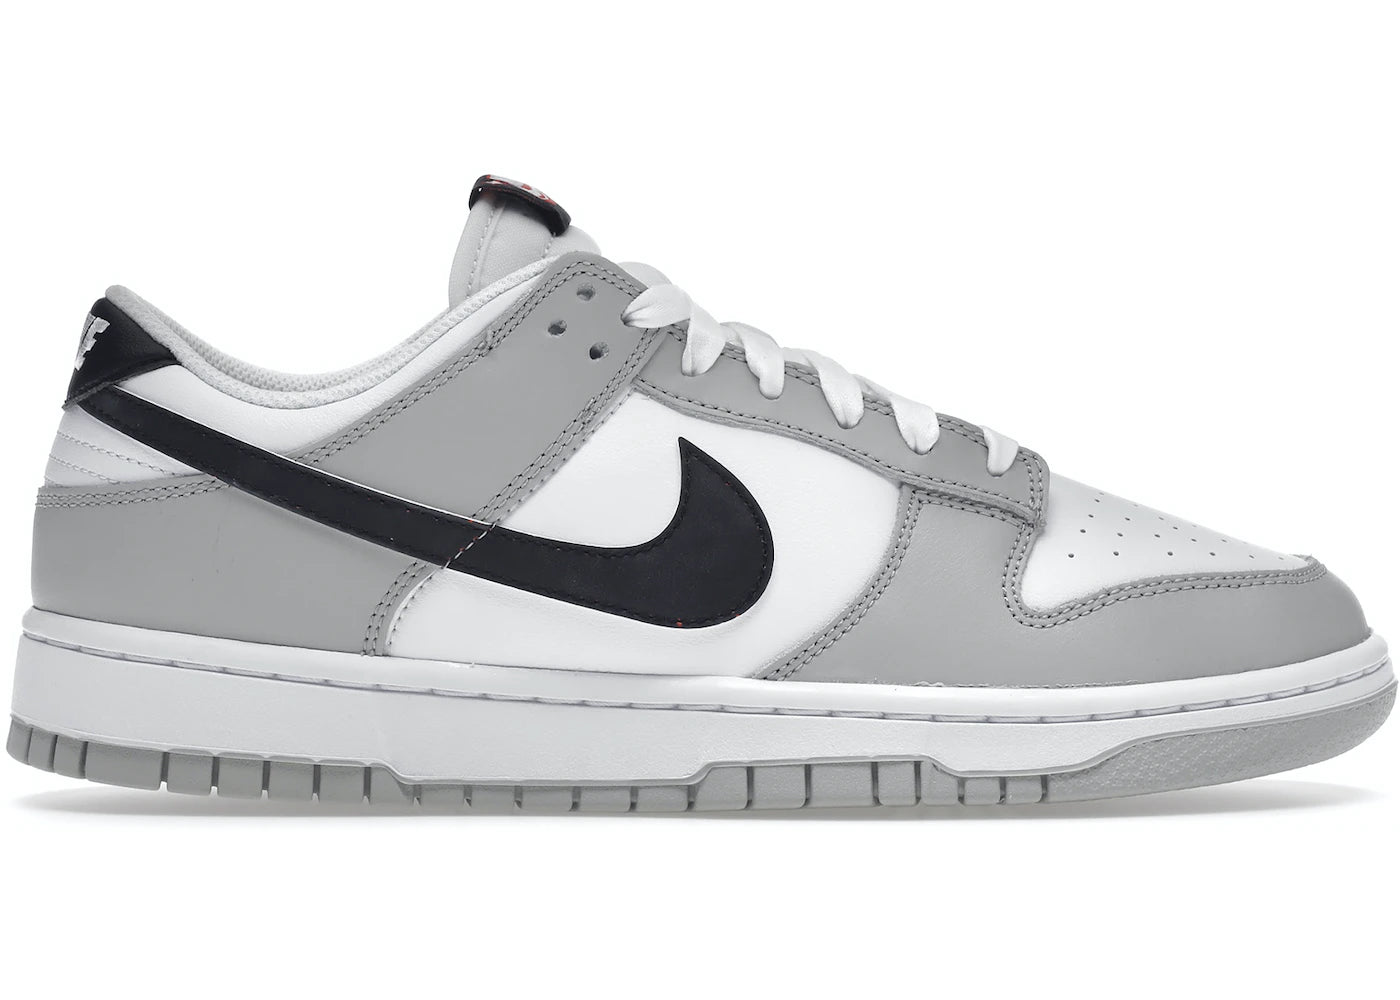 NIKE DUNK LOW SE LOTTERY PACK GREY FOG